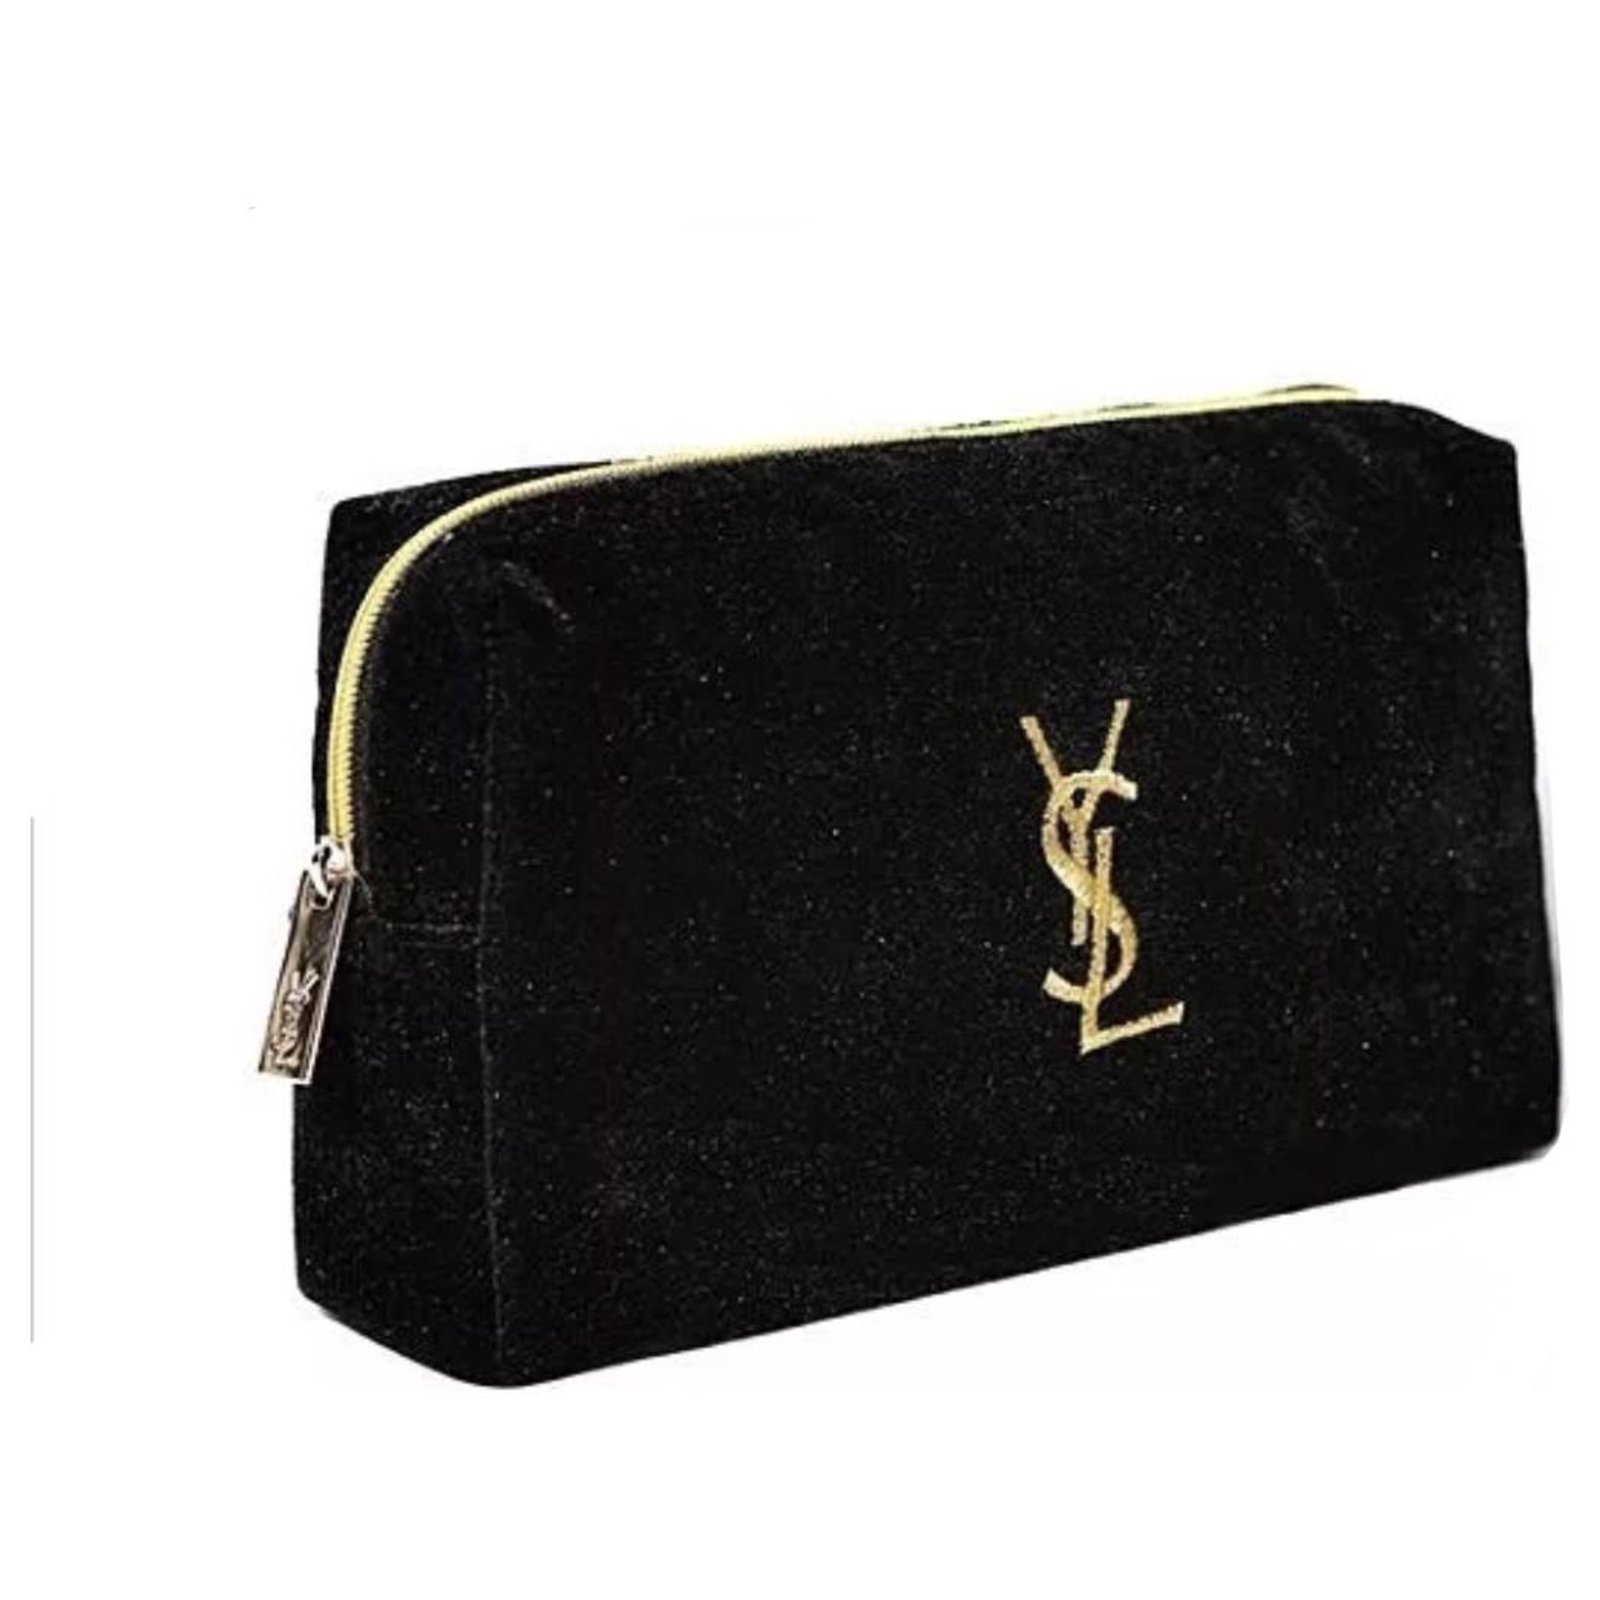  Yves Saint Laurent YSL Cosmetic Pouch Makeup Bag YSL Fragrance  Bag - 0957 : Beauty & Personal Care